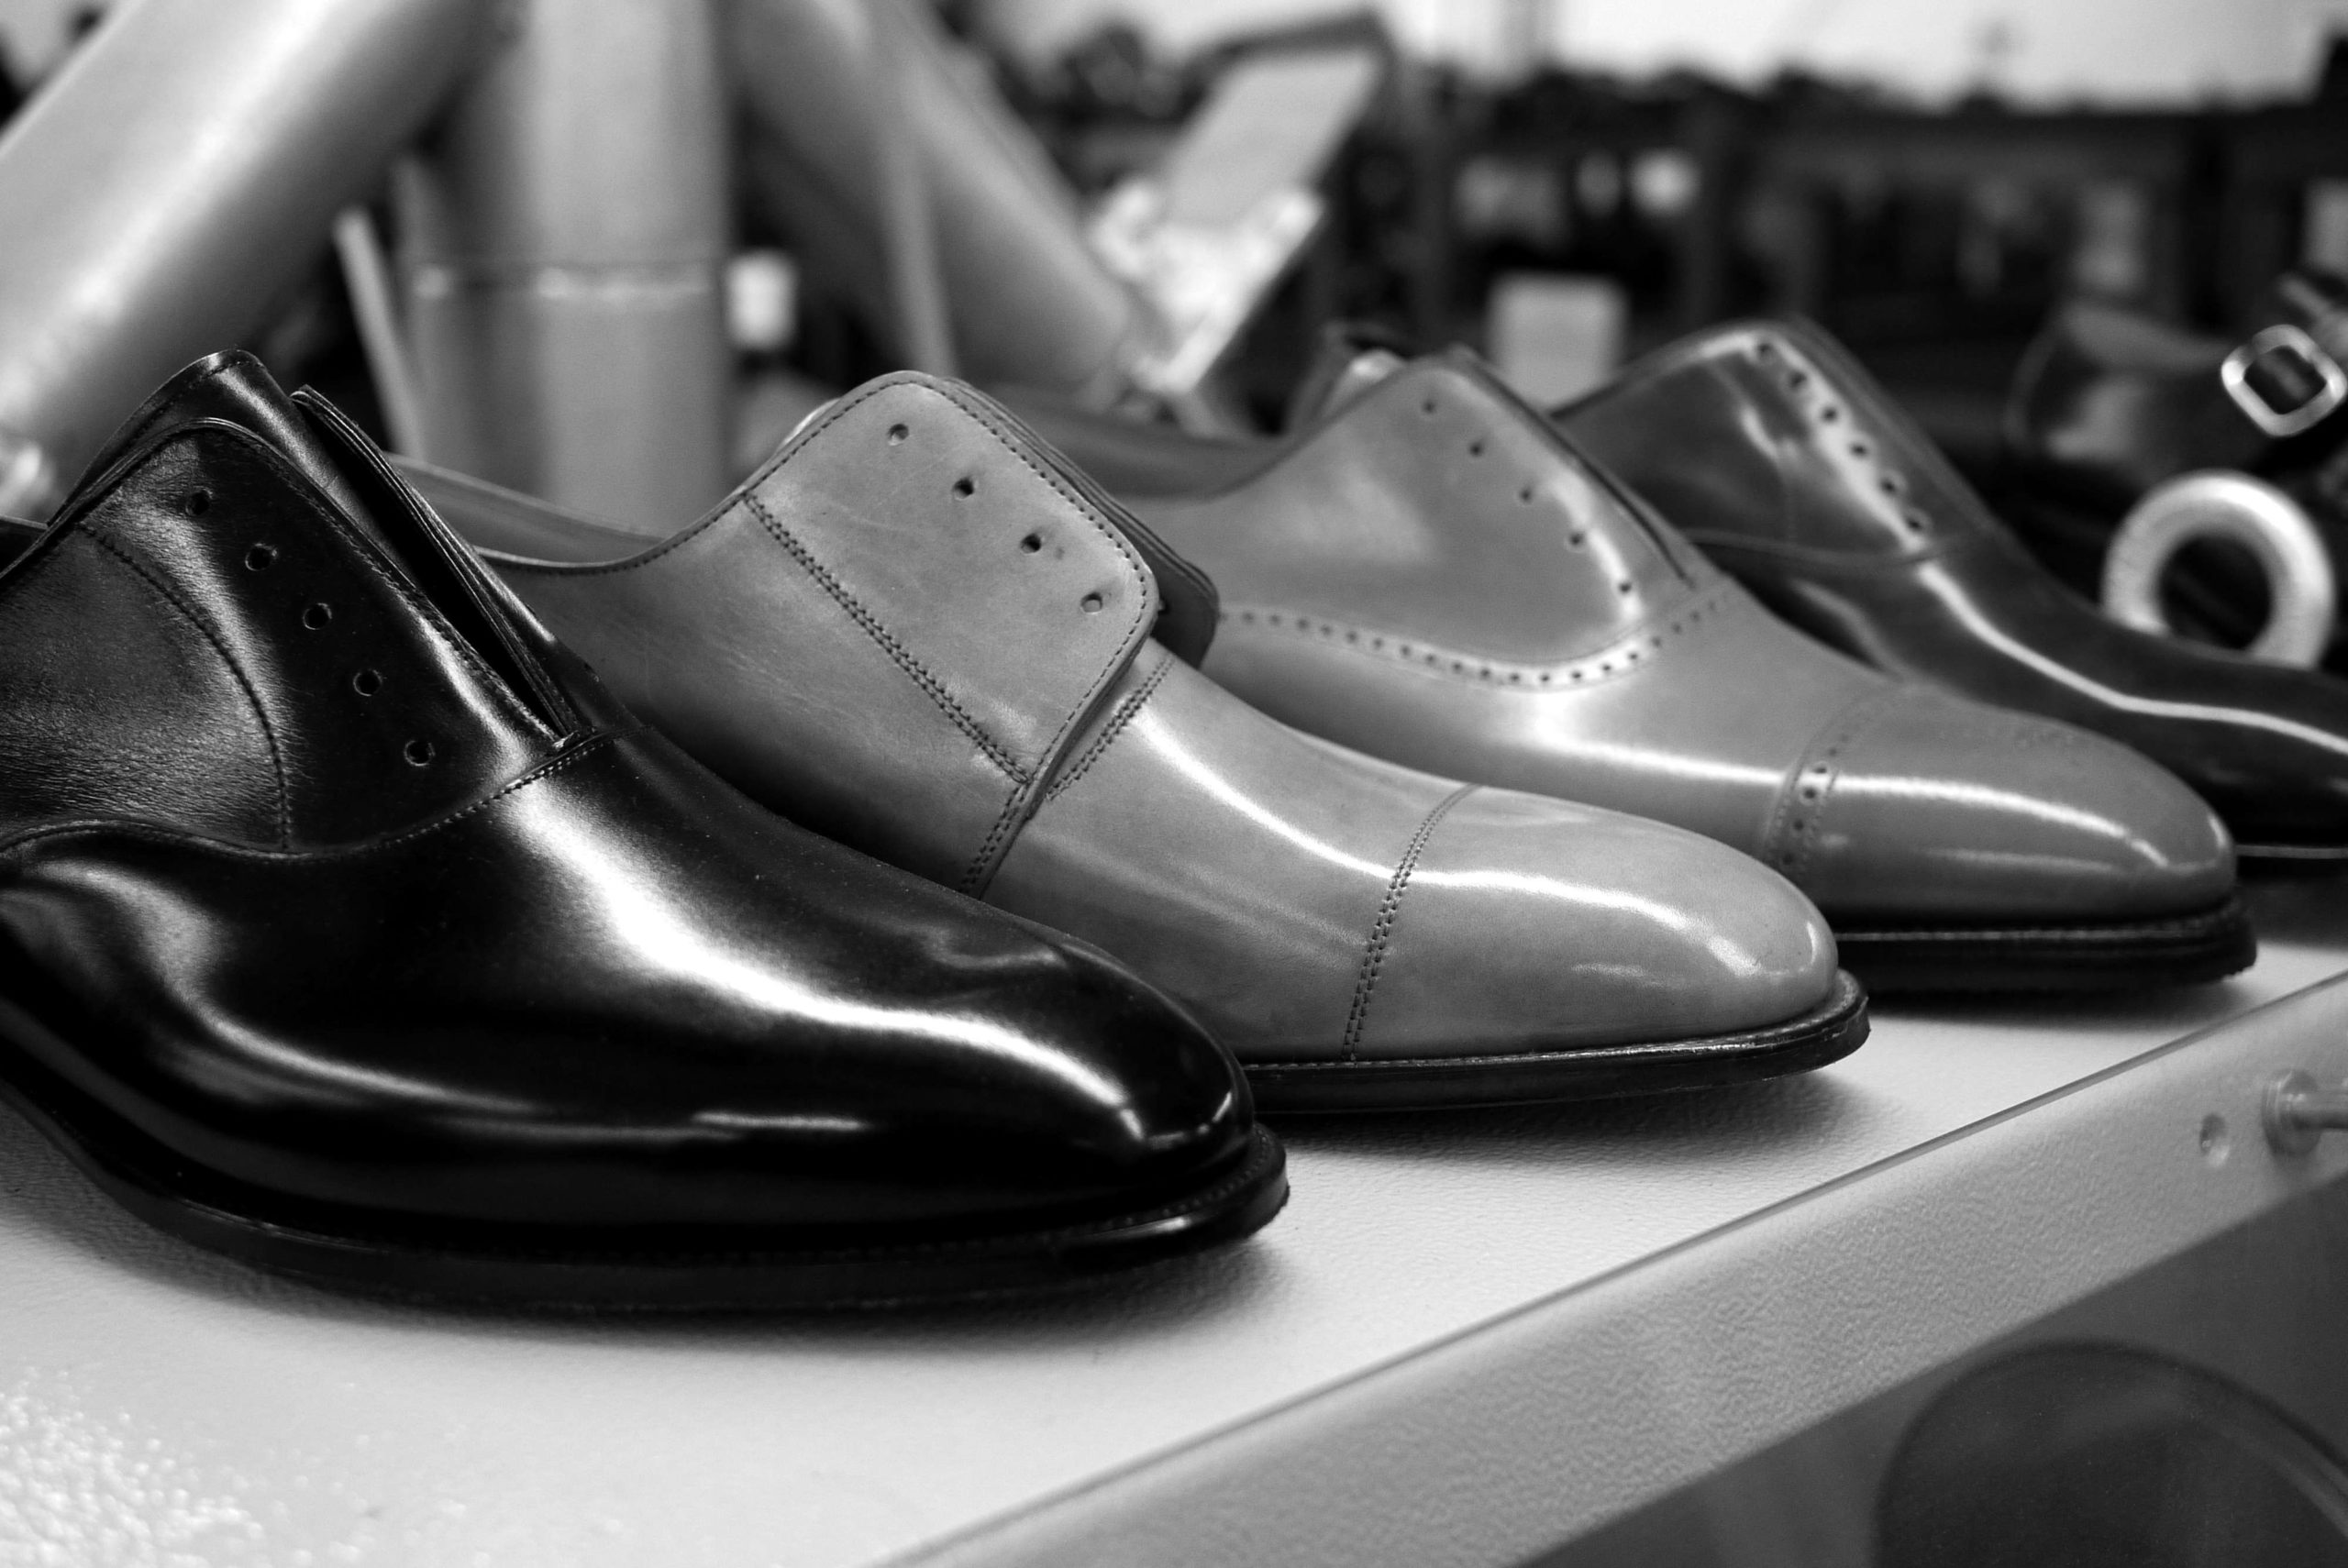 Hermès’ Shoe Brand John Lobb Launches First Online Store in China on JD